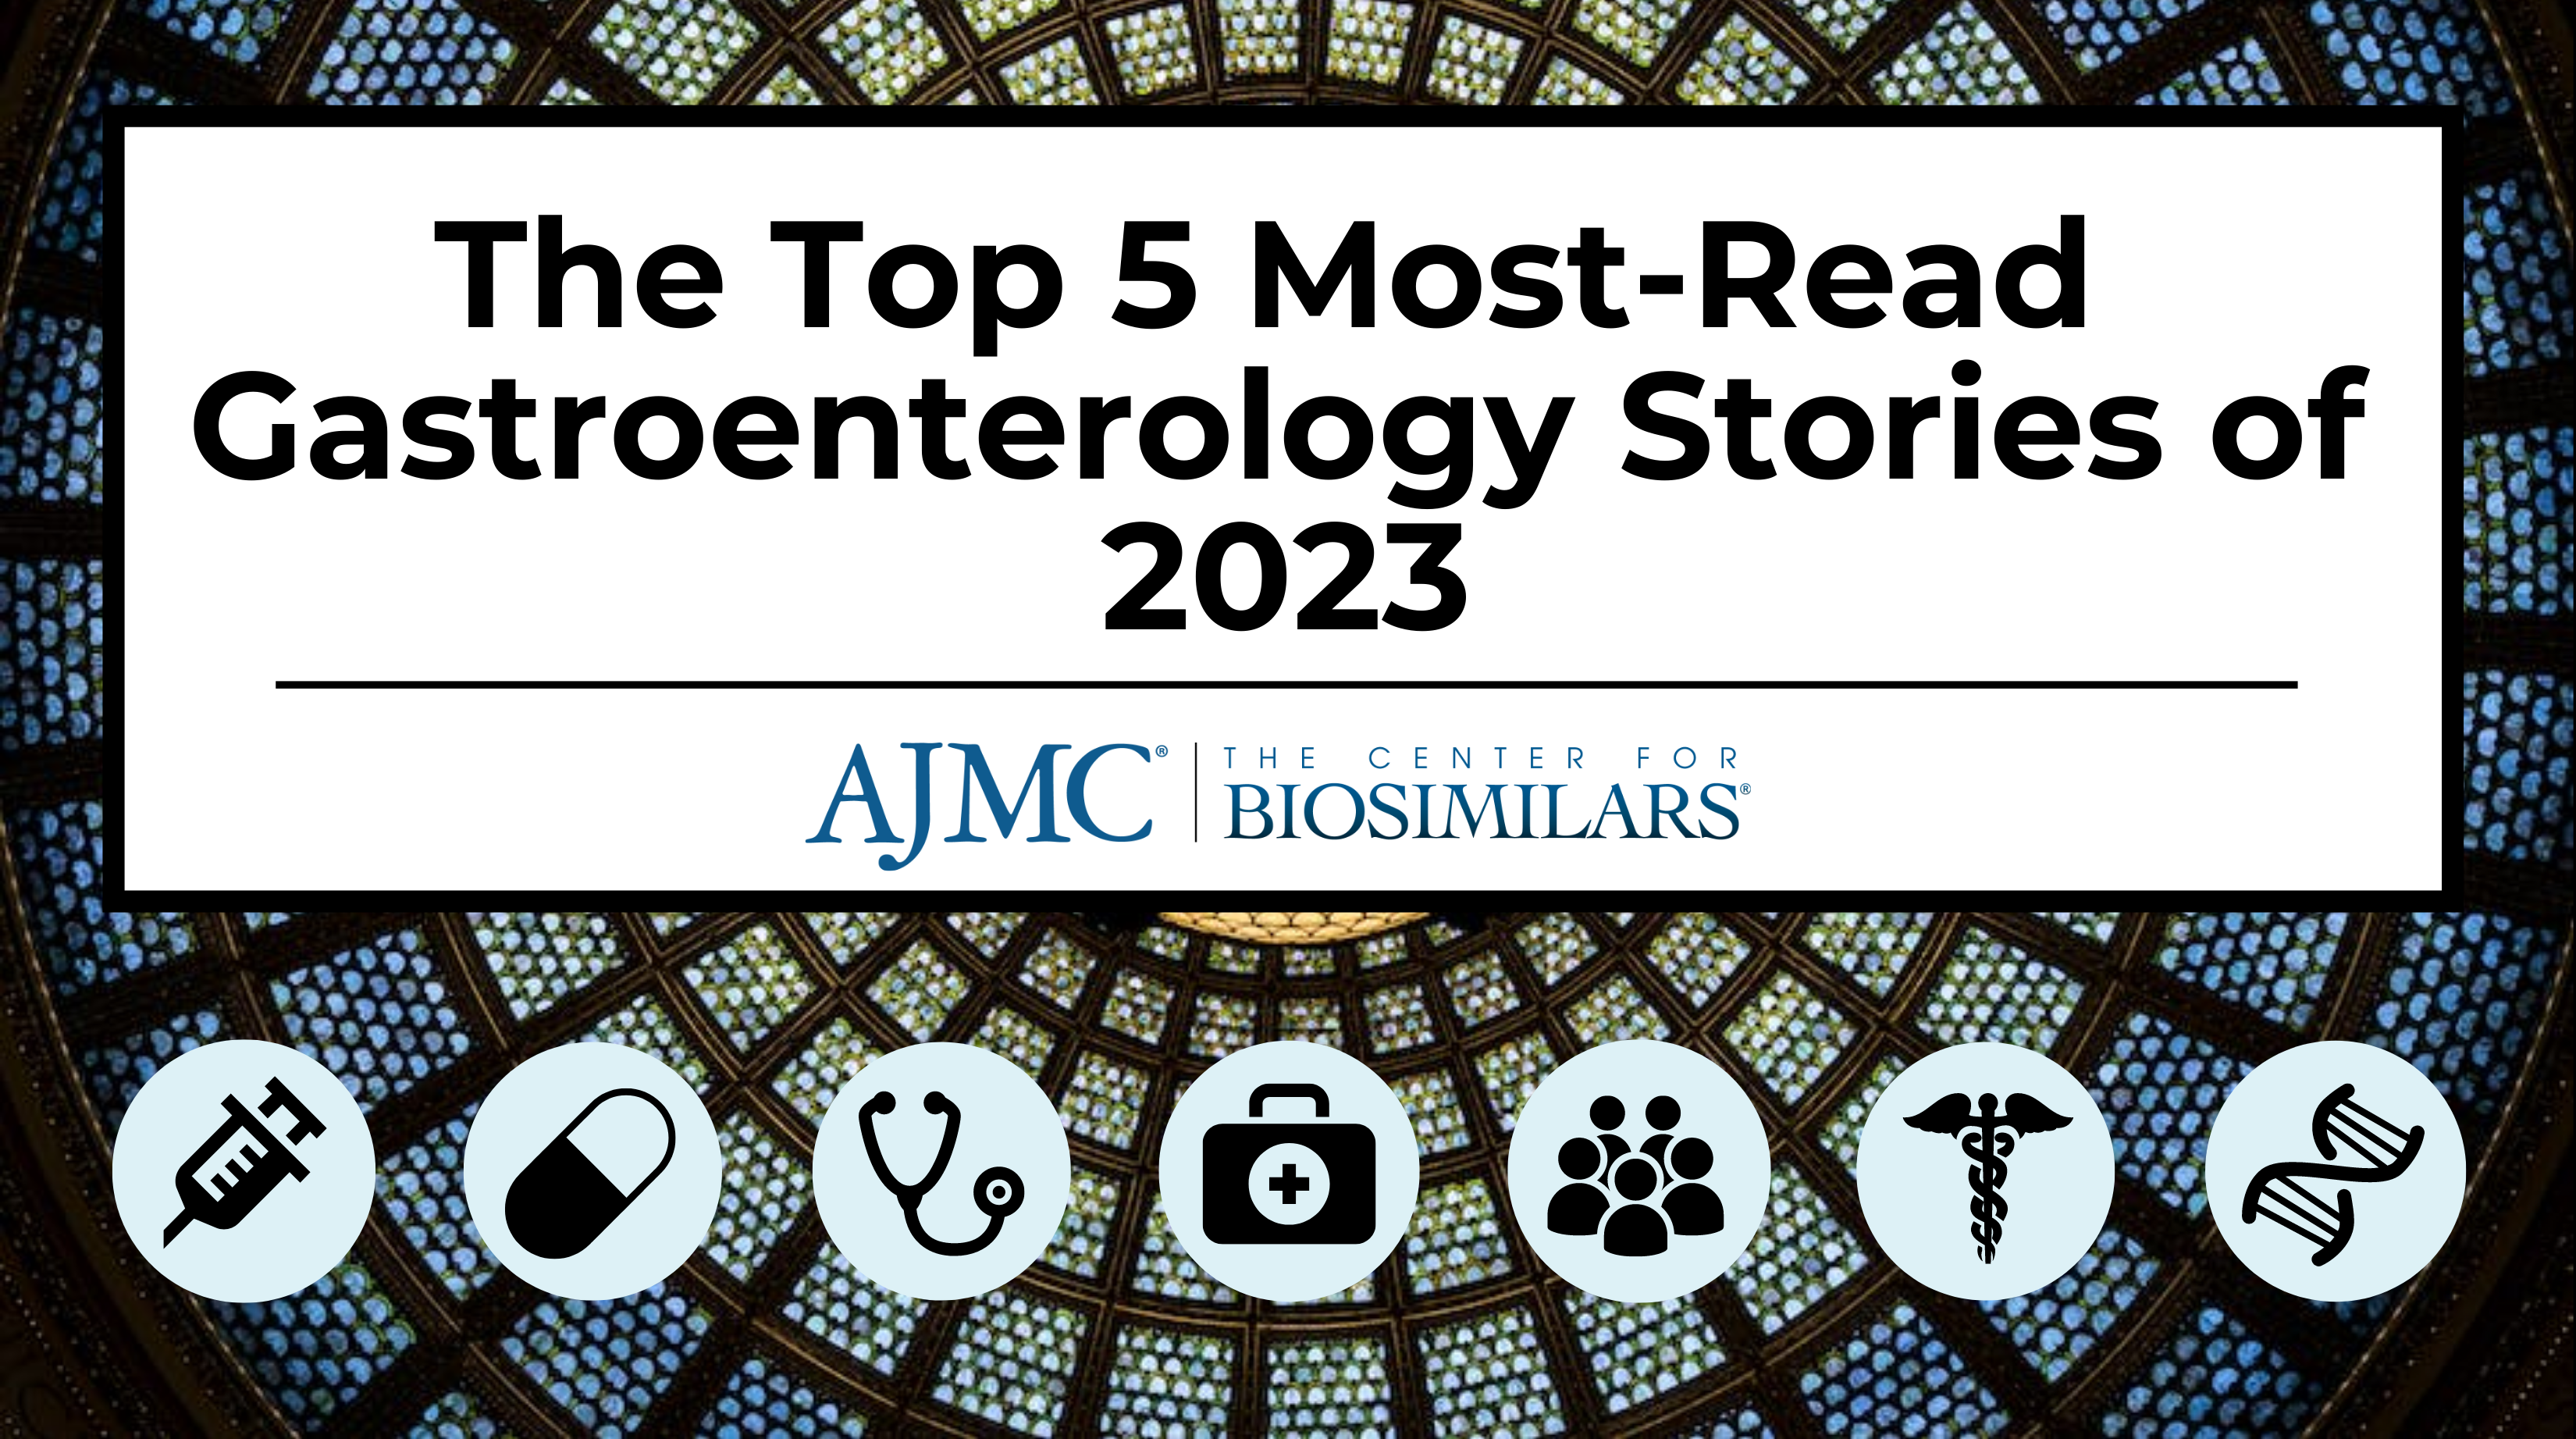 The Top 5 Most-Read Gastroenterology Stories of 2023